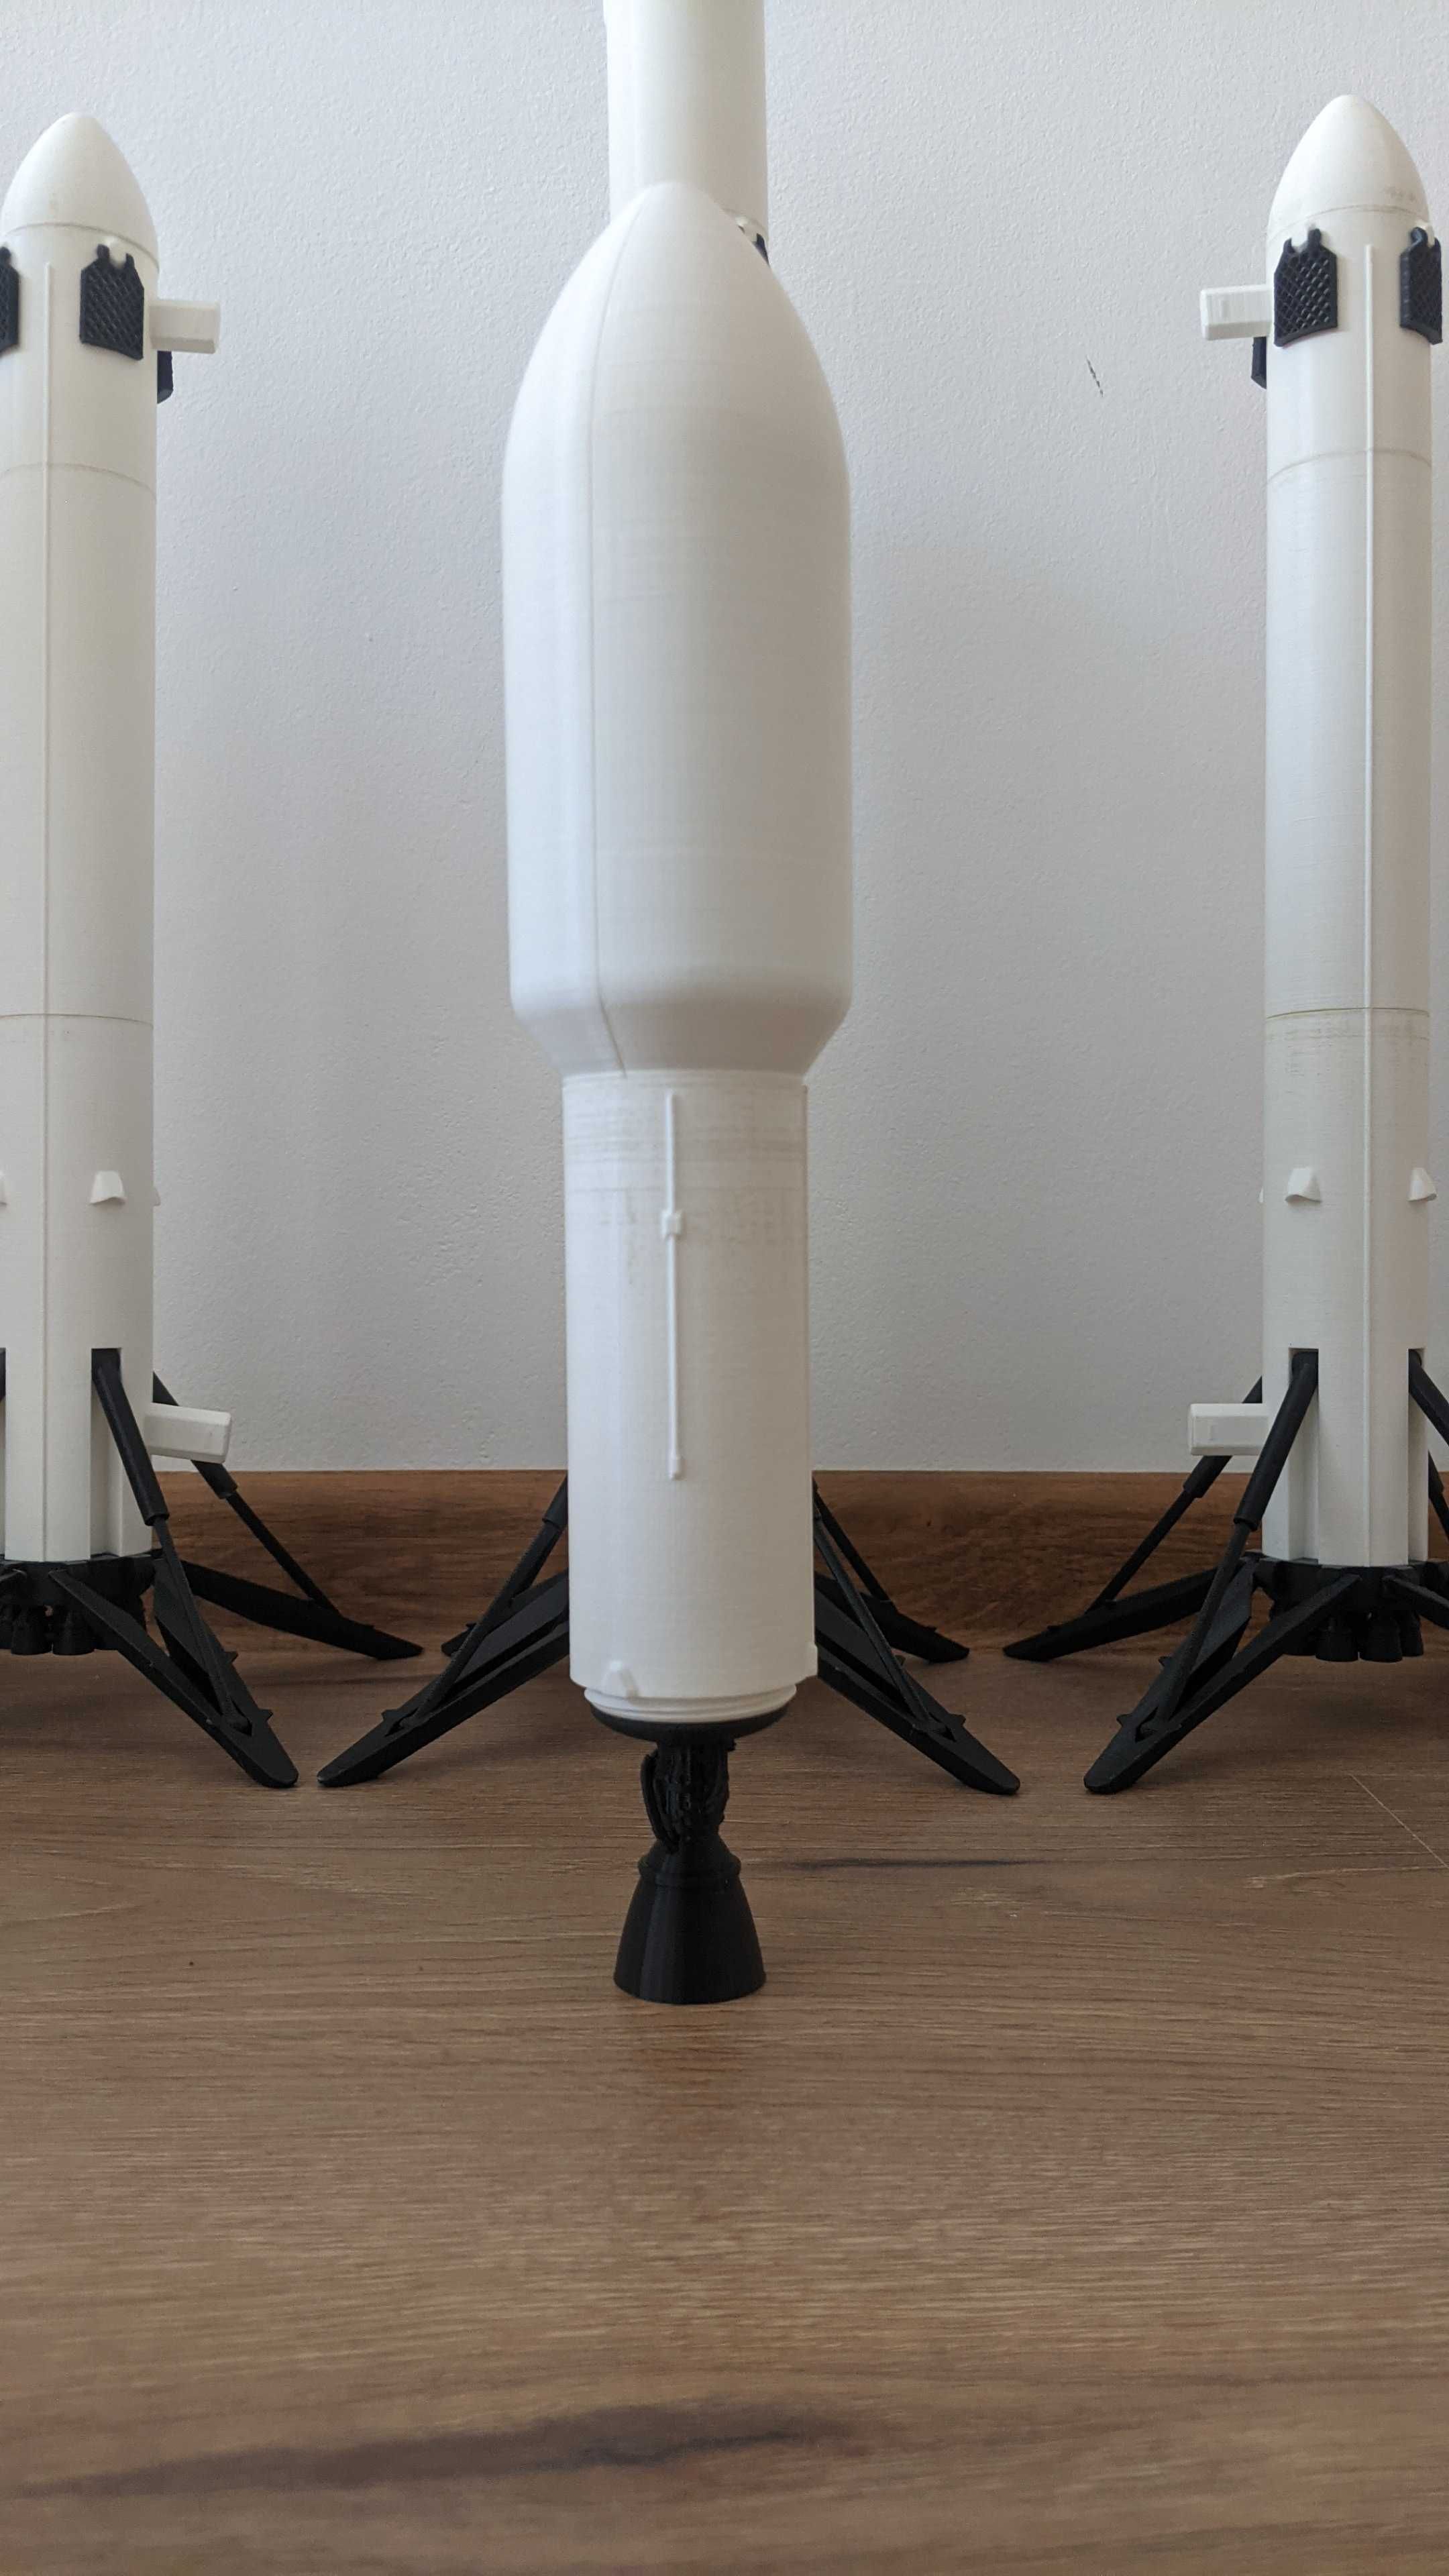 3D Printed SpaceX Falcon Heavy Scale Model